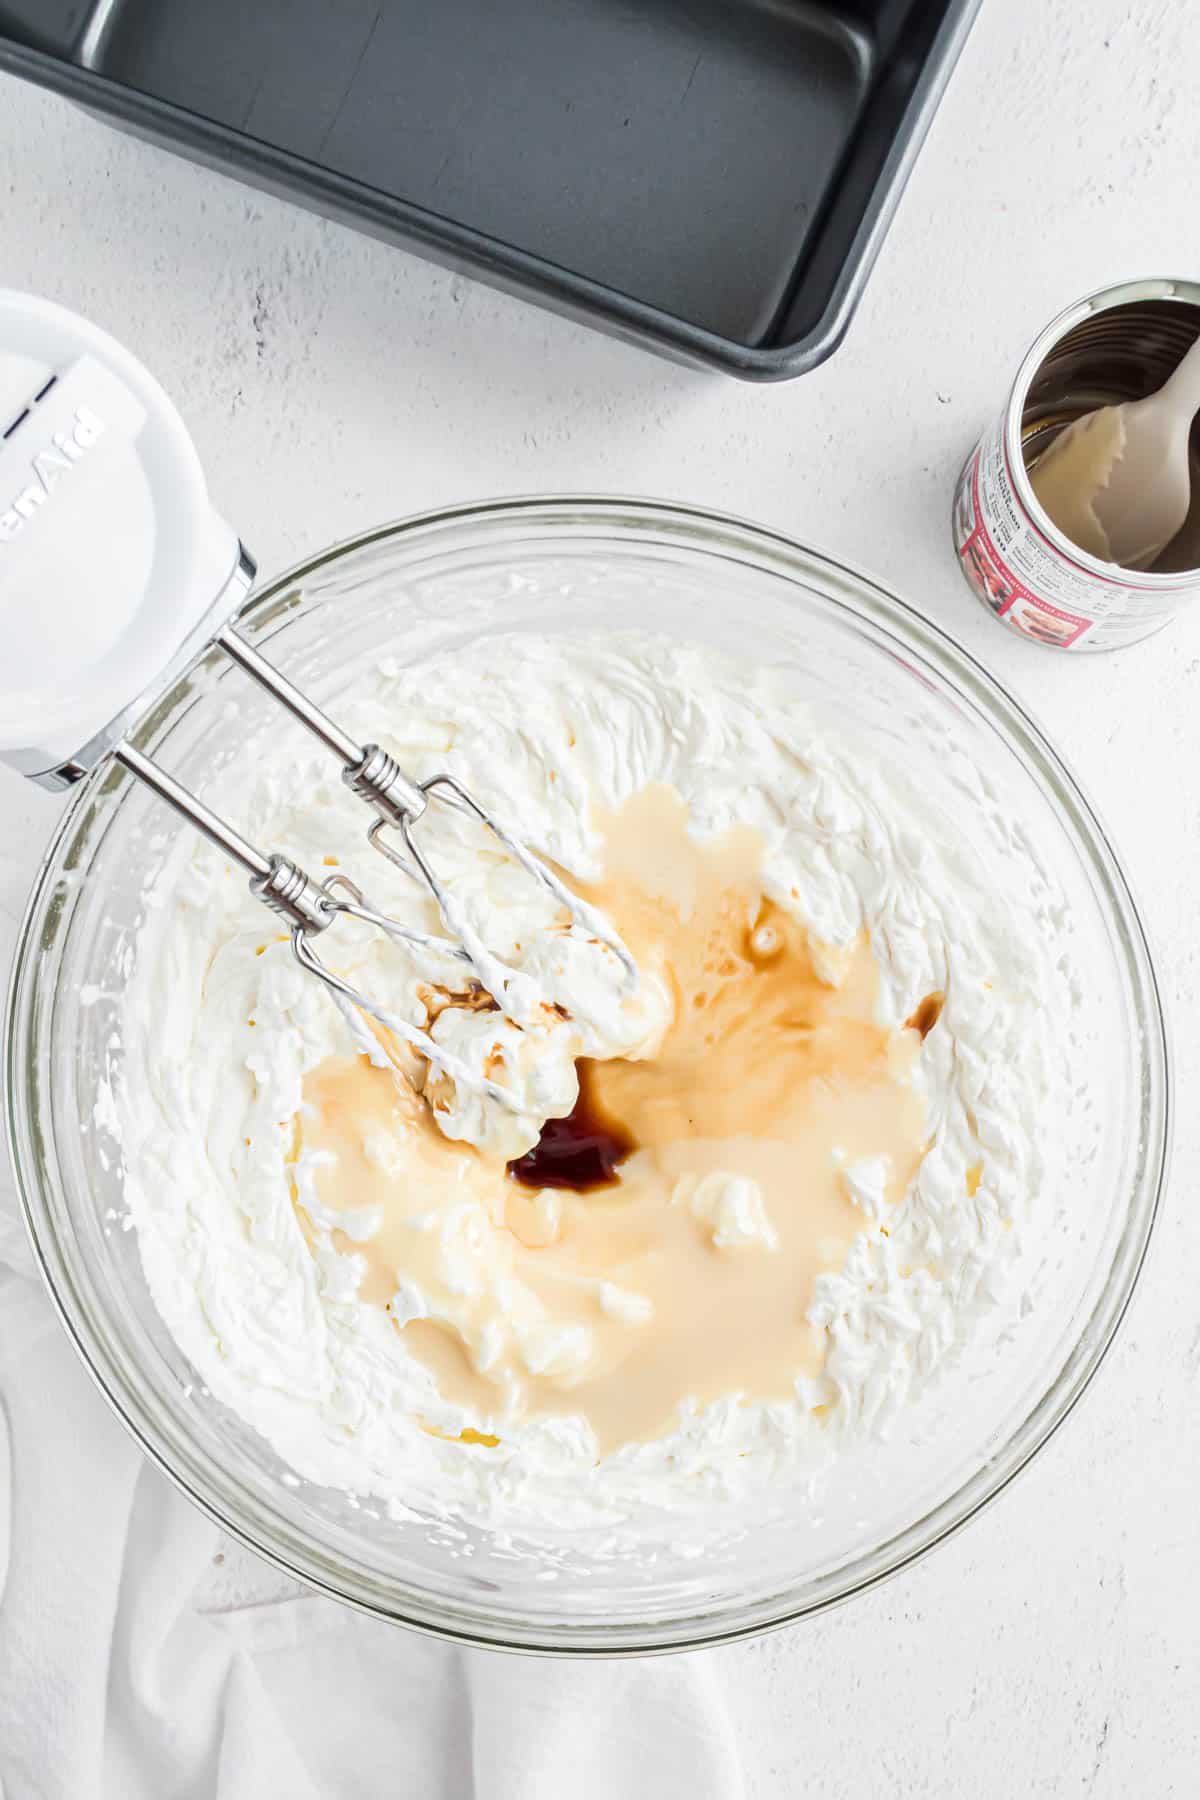 A large bowl with whipped cream, sweetened condensed milk, and vanilla extract.